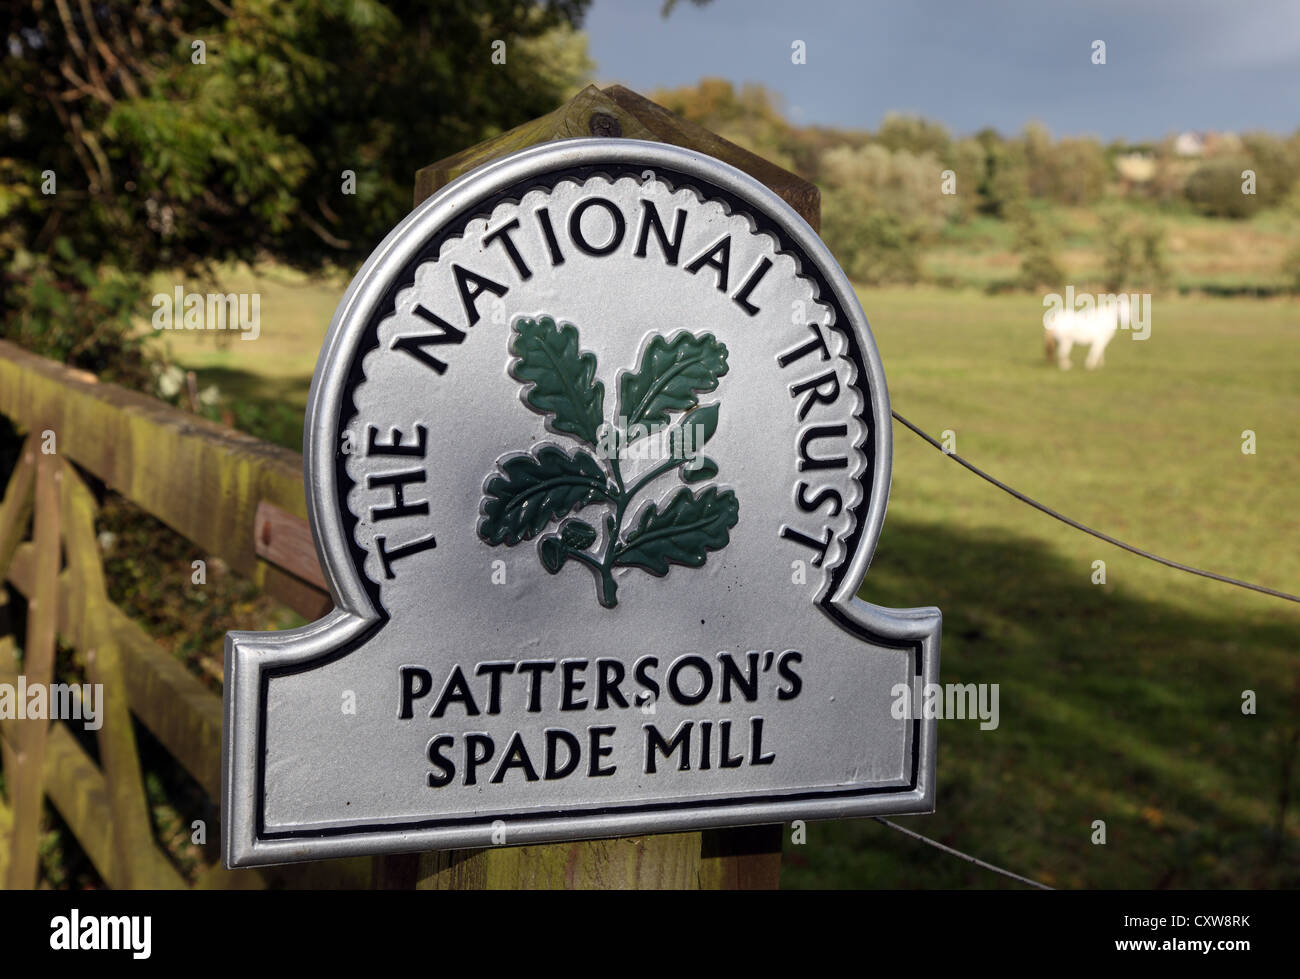 Patterson's Spade Mill National Trust sign, Templepatrick, Northern Ireland Stock Photo